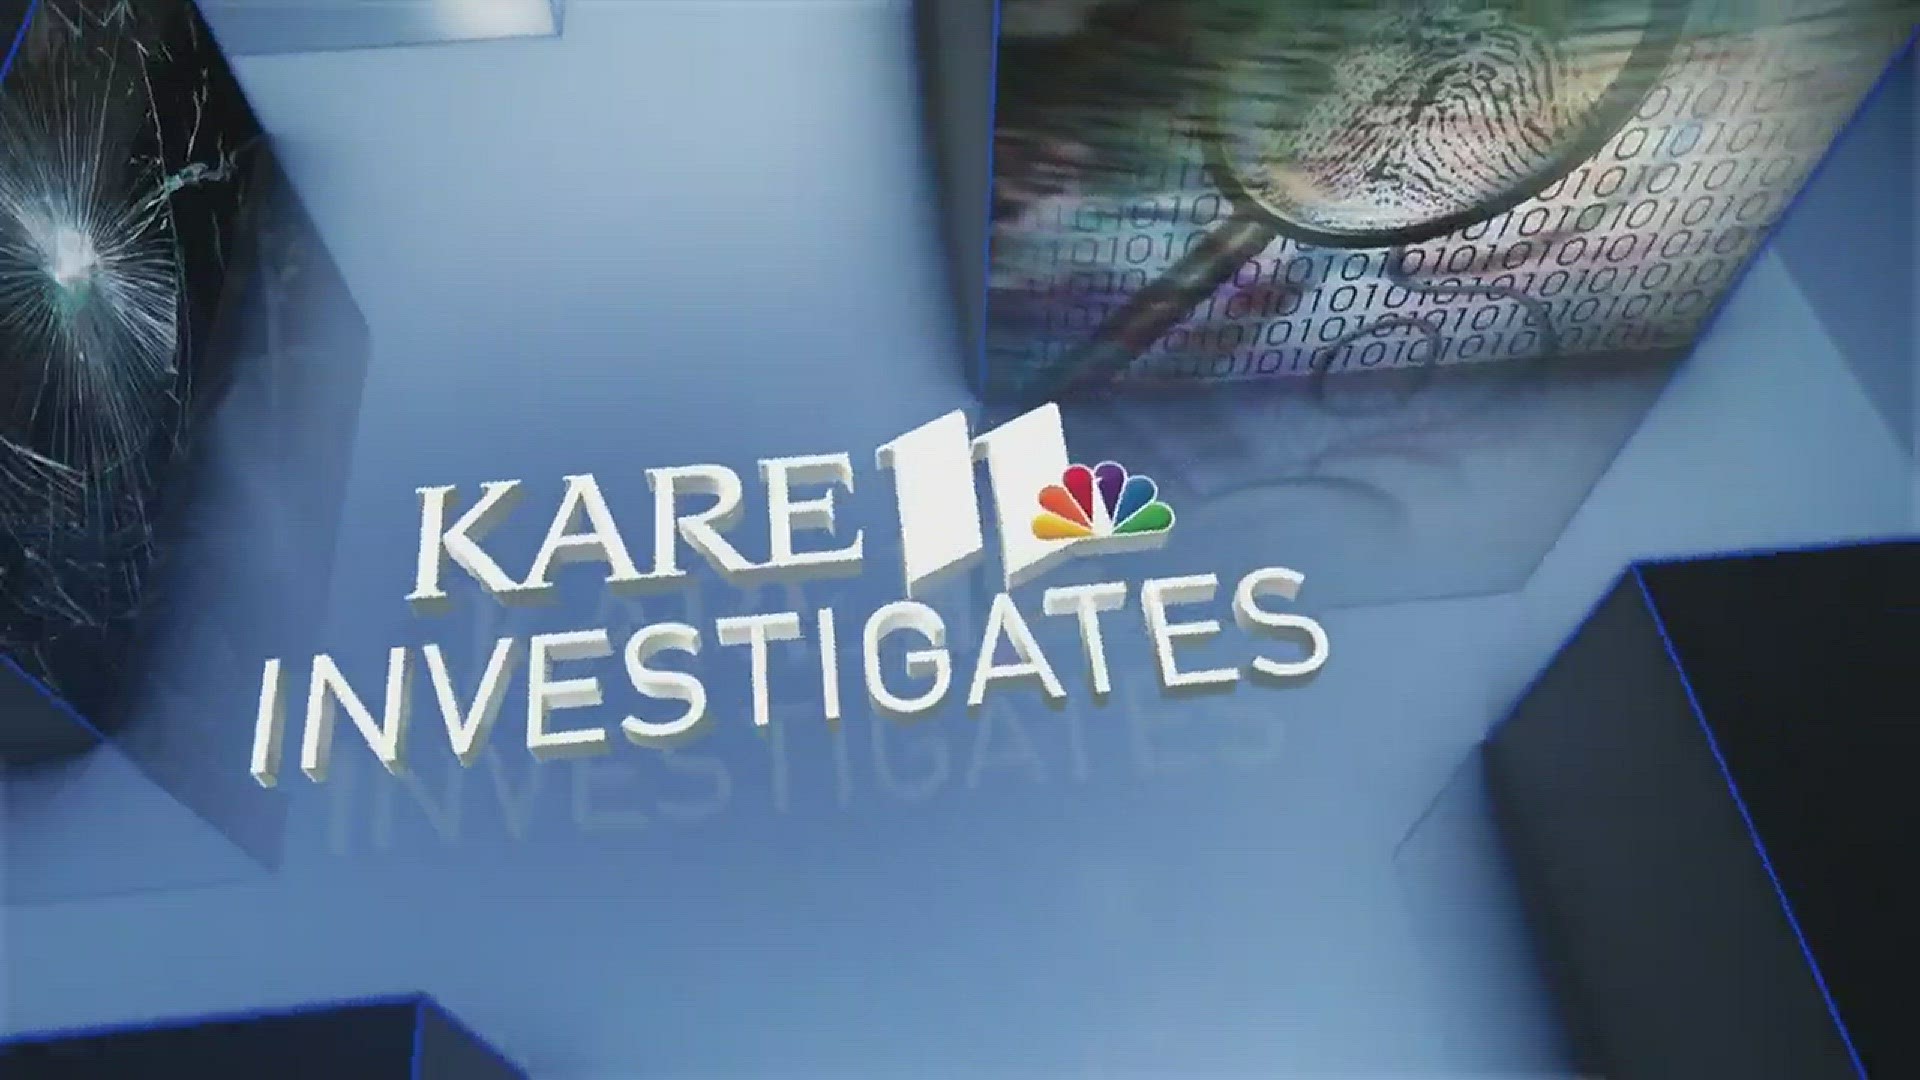 The first chapter of the KARE 11 Investigates special.